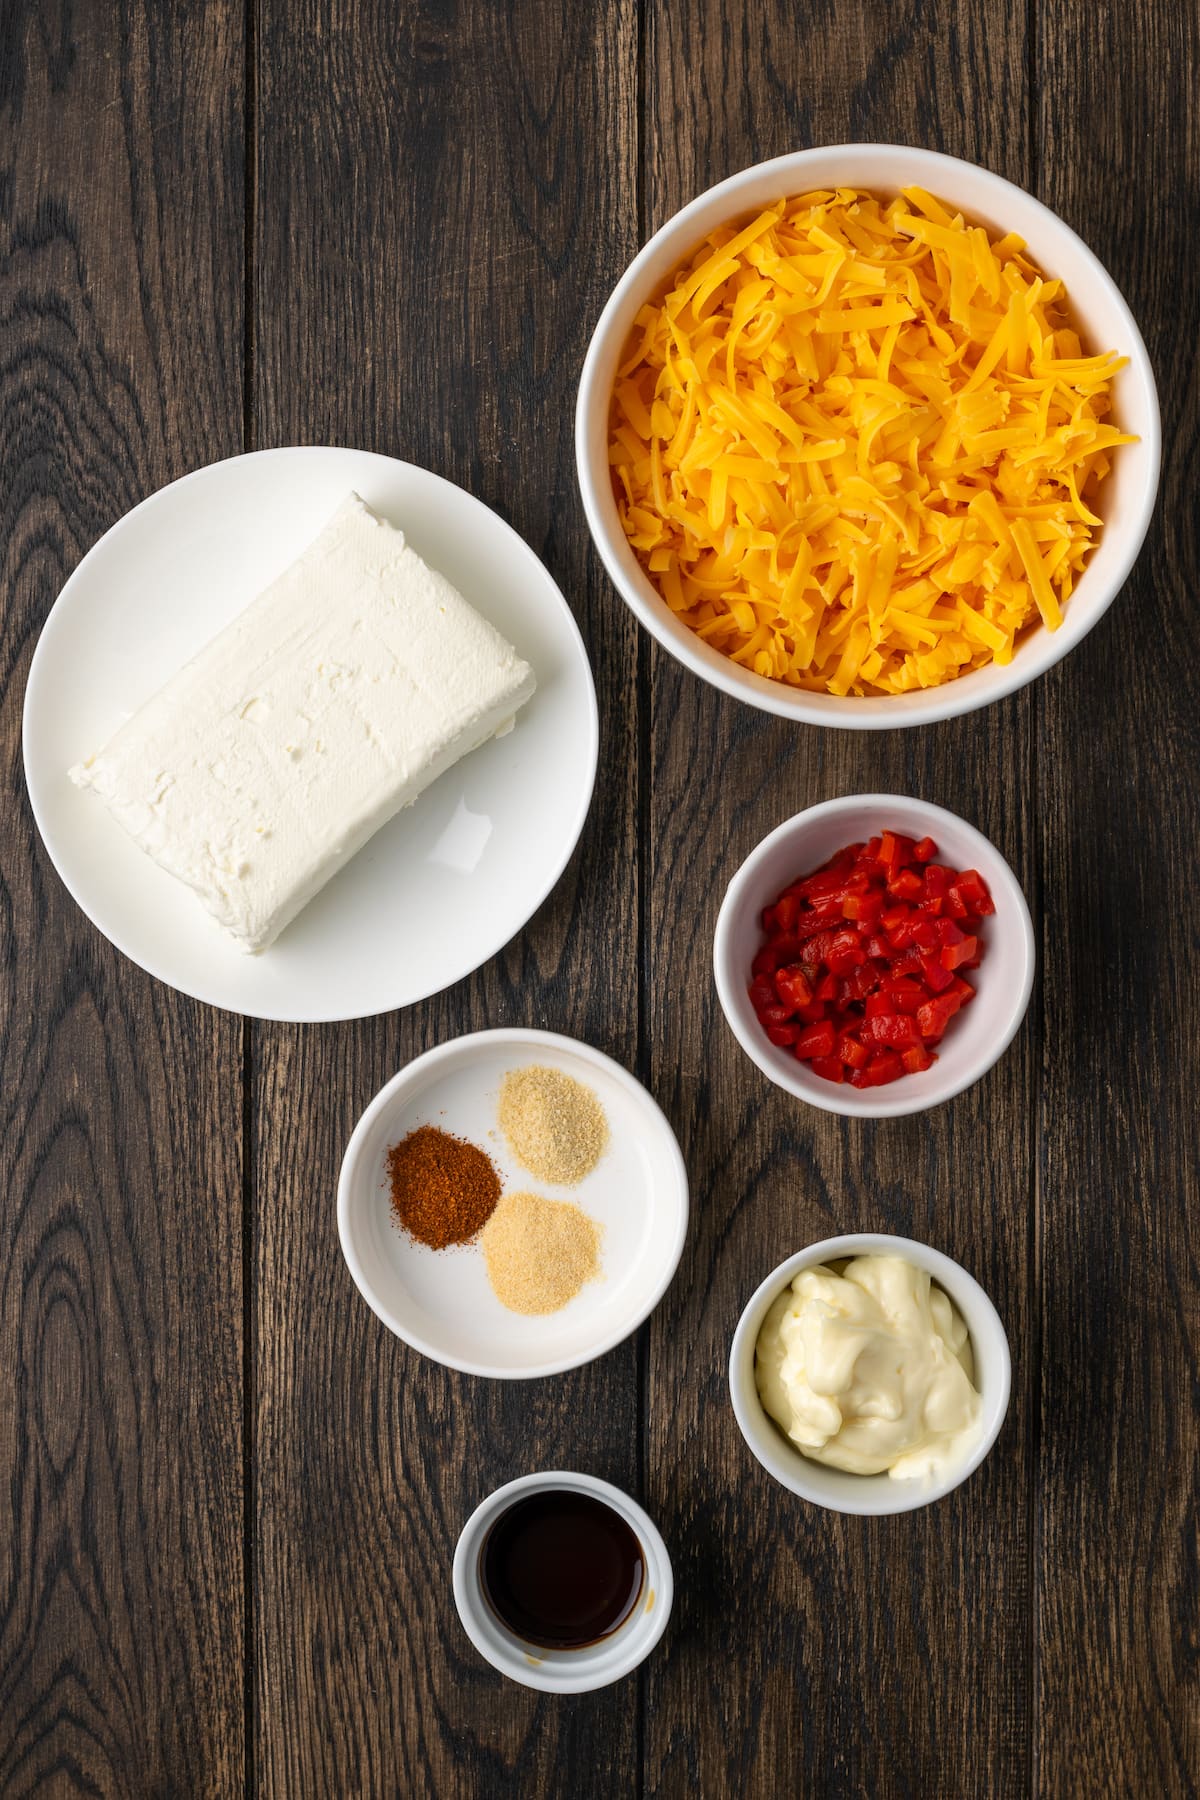 The ingredients for pimento cheese.